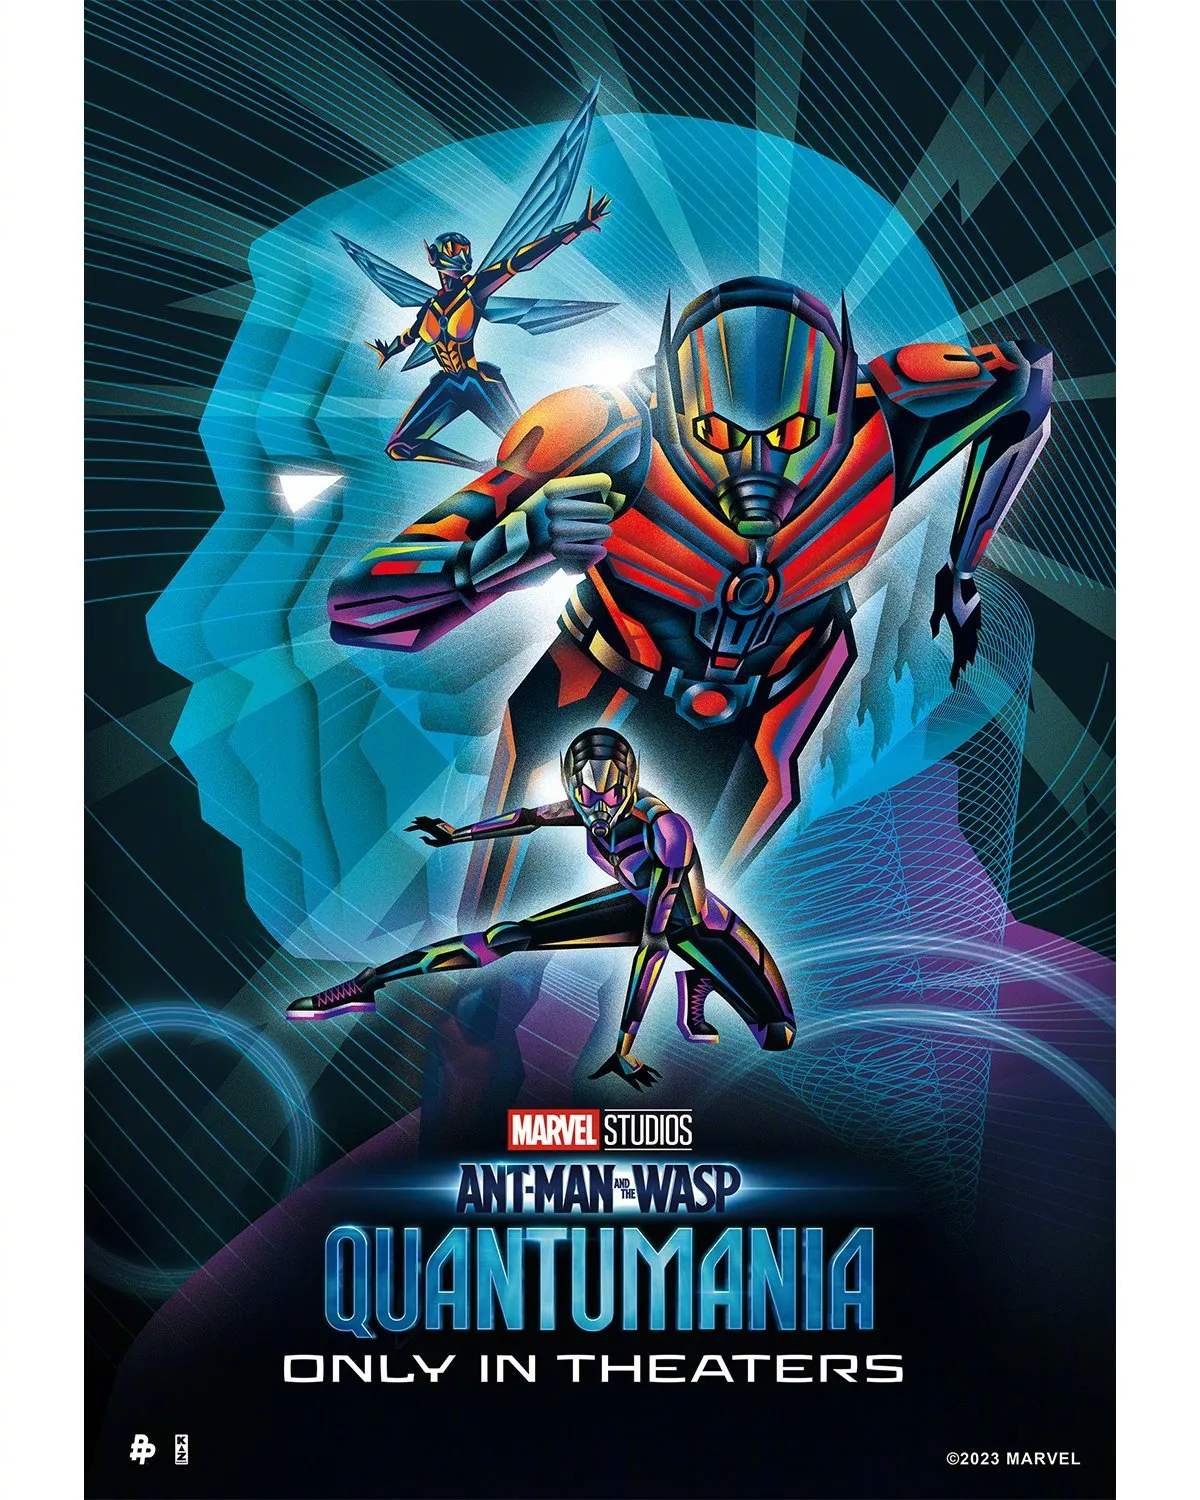 'Ant-Man and the Wasp: Quantumania' Releases New Art Poster | FMV6